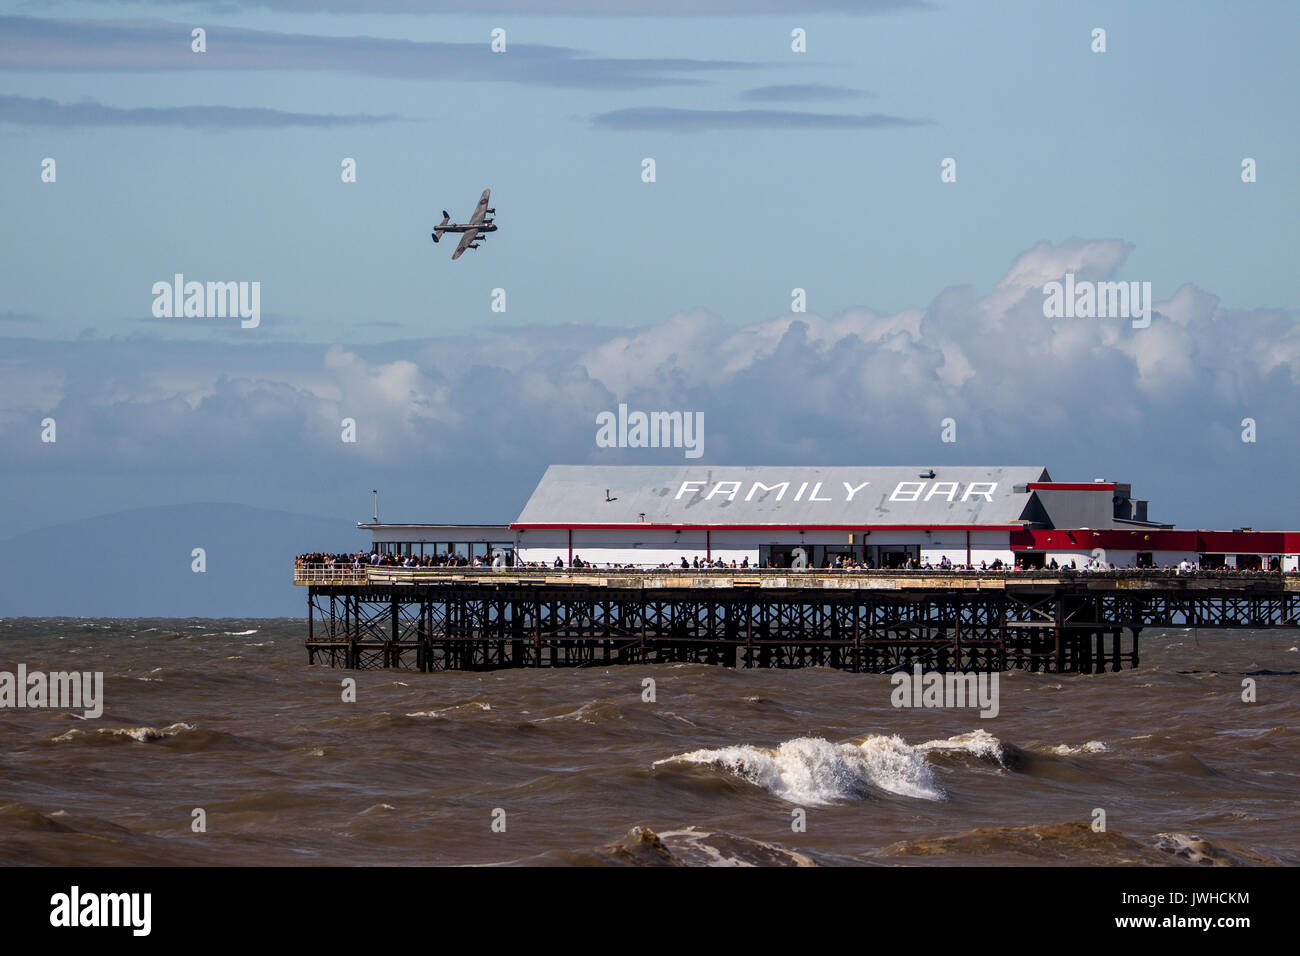 Blackpool, Lancashire, UK. 12th Aug, 2017. RAF Lancaster from the Battle of Britain Memorial Flight over Central Pier at Blackpool Credit: Russell Millner/Alamy Live News Stock Photo